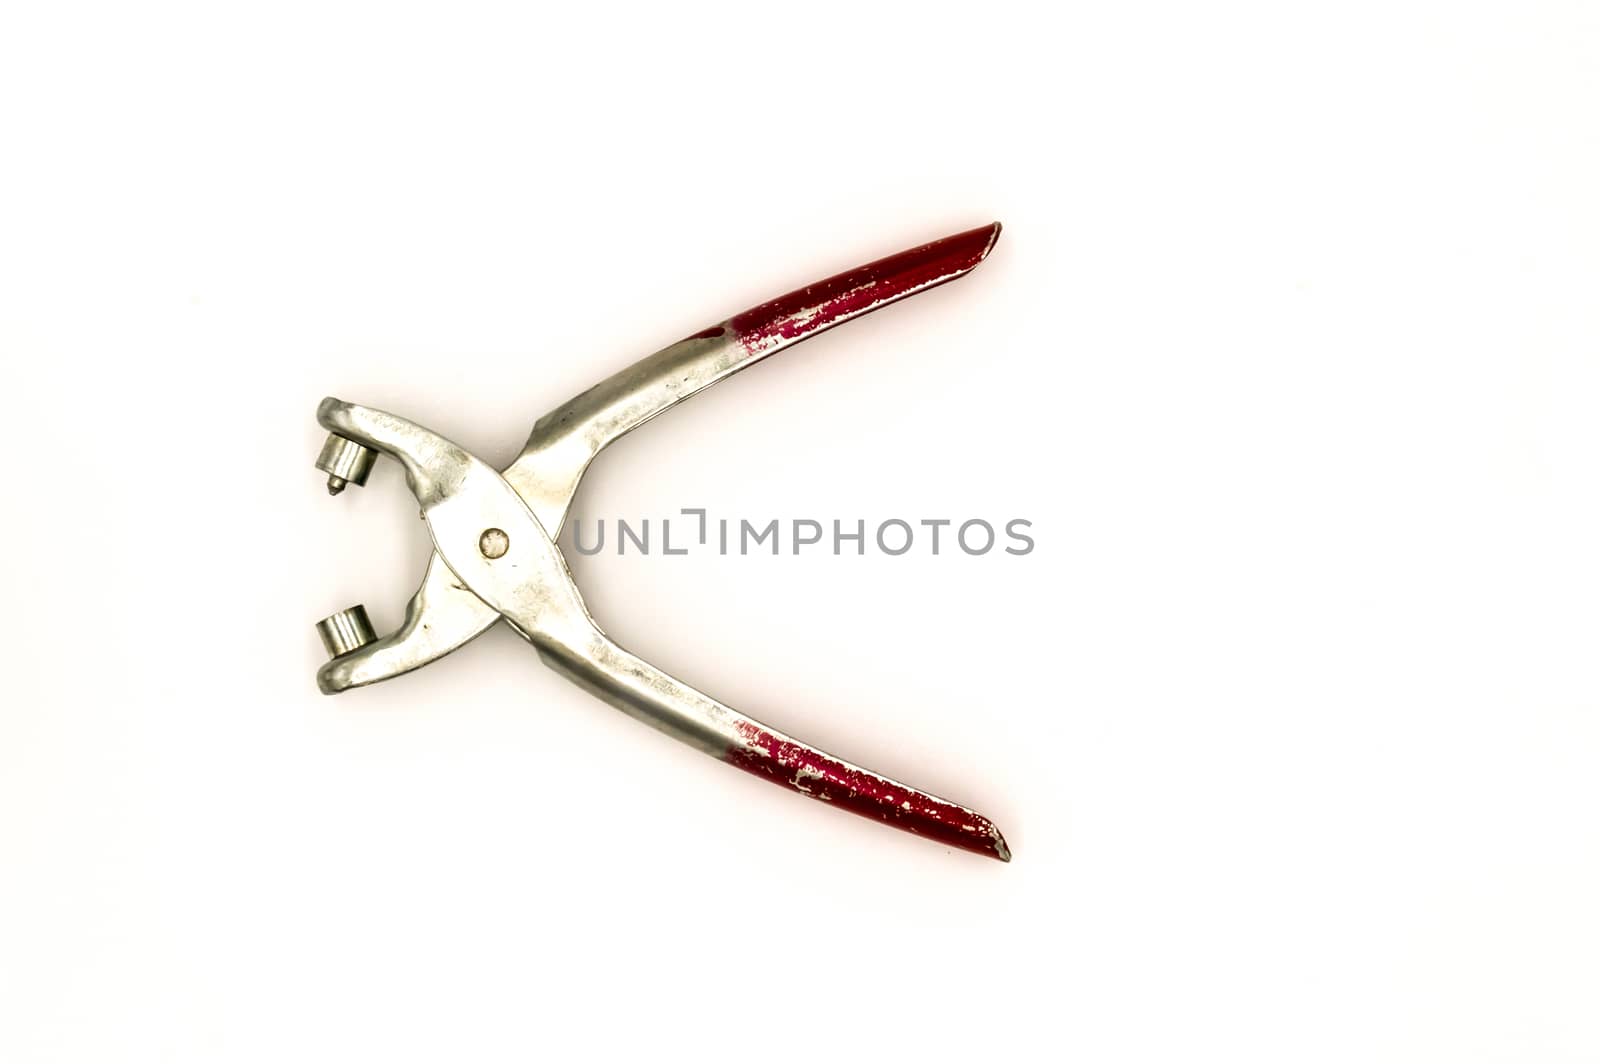 Eyelet pliers for attaching snaps  by Philou1000